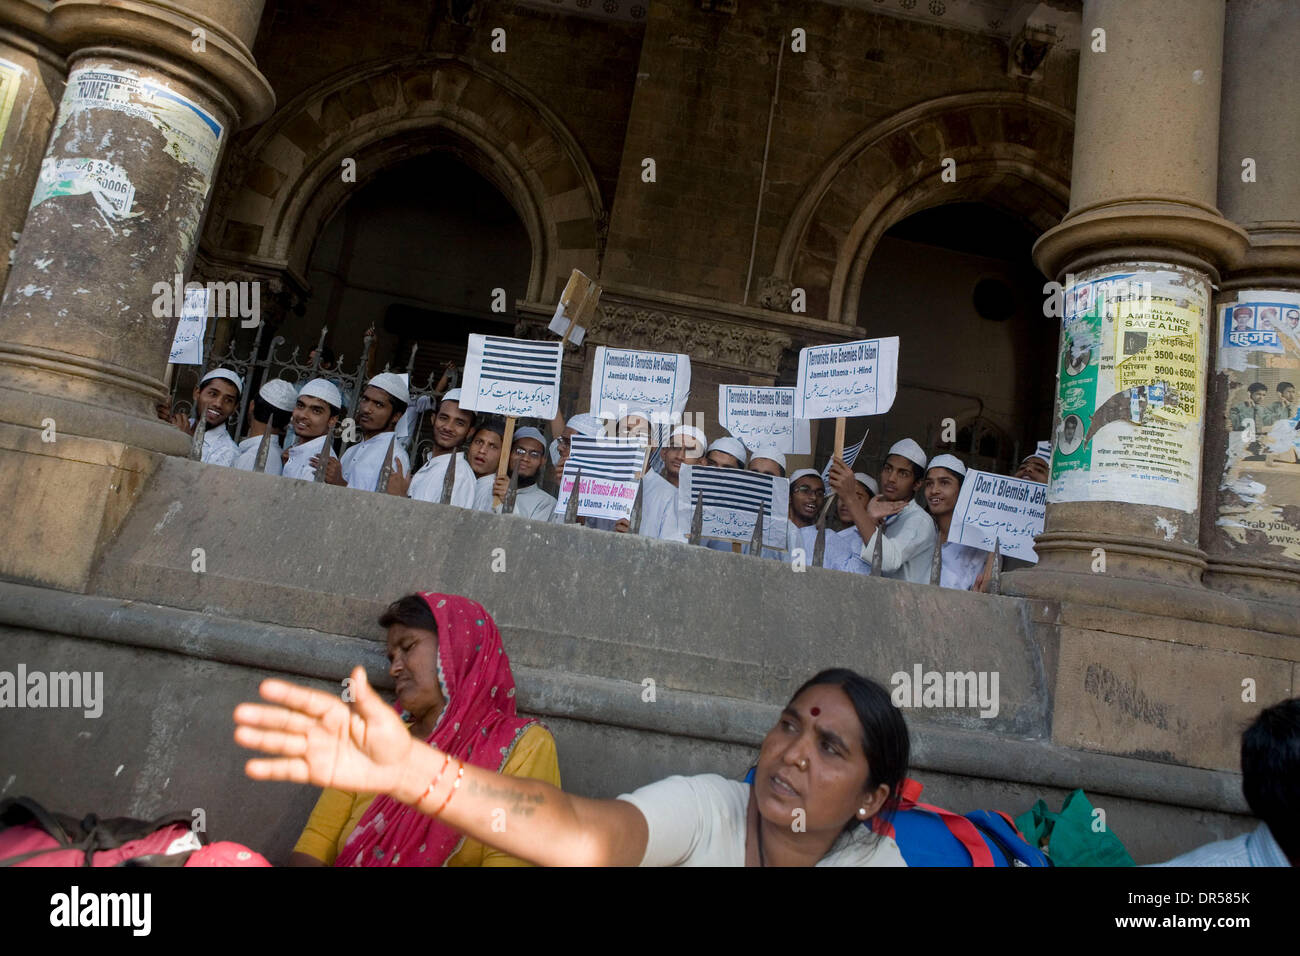 Dec 07, 2008 - Mumbai, India - Muslim organisations in Mumbai hold a peaceful rally marching from Victoria Terminus (VT) station to The Oberoi Trident hotel to demonstrate their 'oneness' with India by condemning the dastardly acts 'Muslim Terrorists'. (Credit Image: © Zishaan Akbar Latif/ZUMA Press) Stock Photo